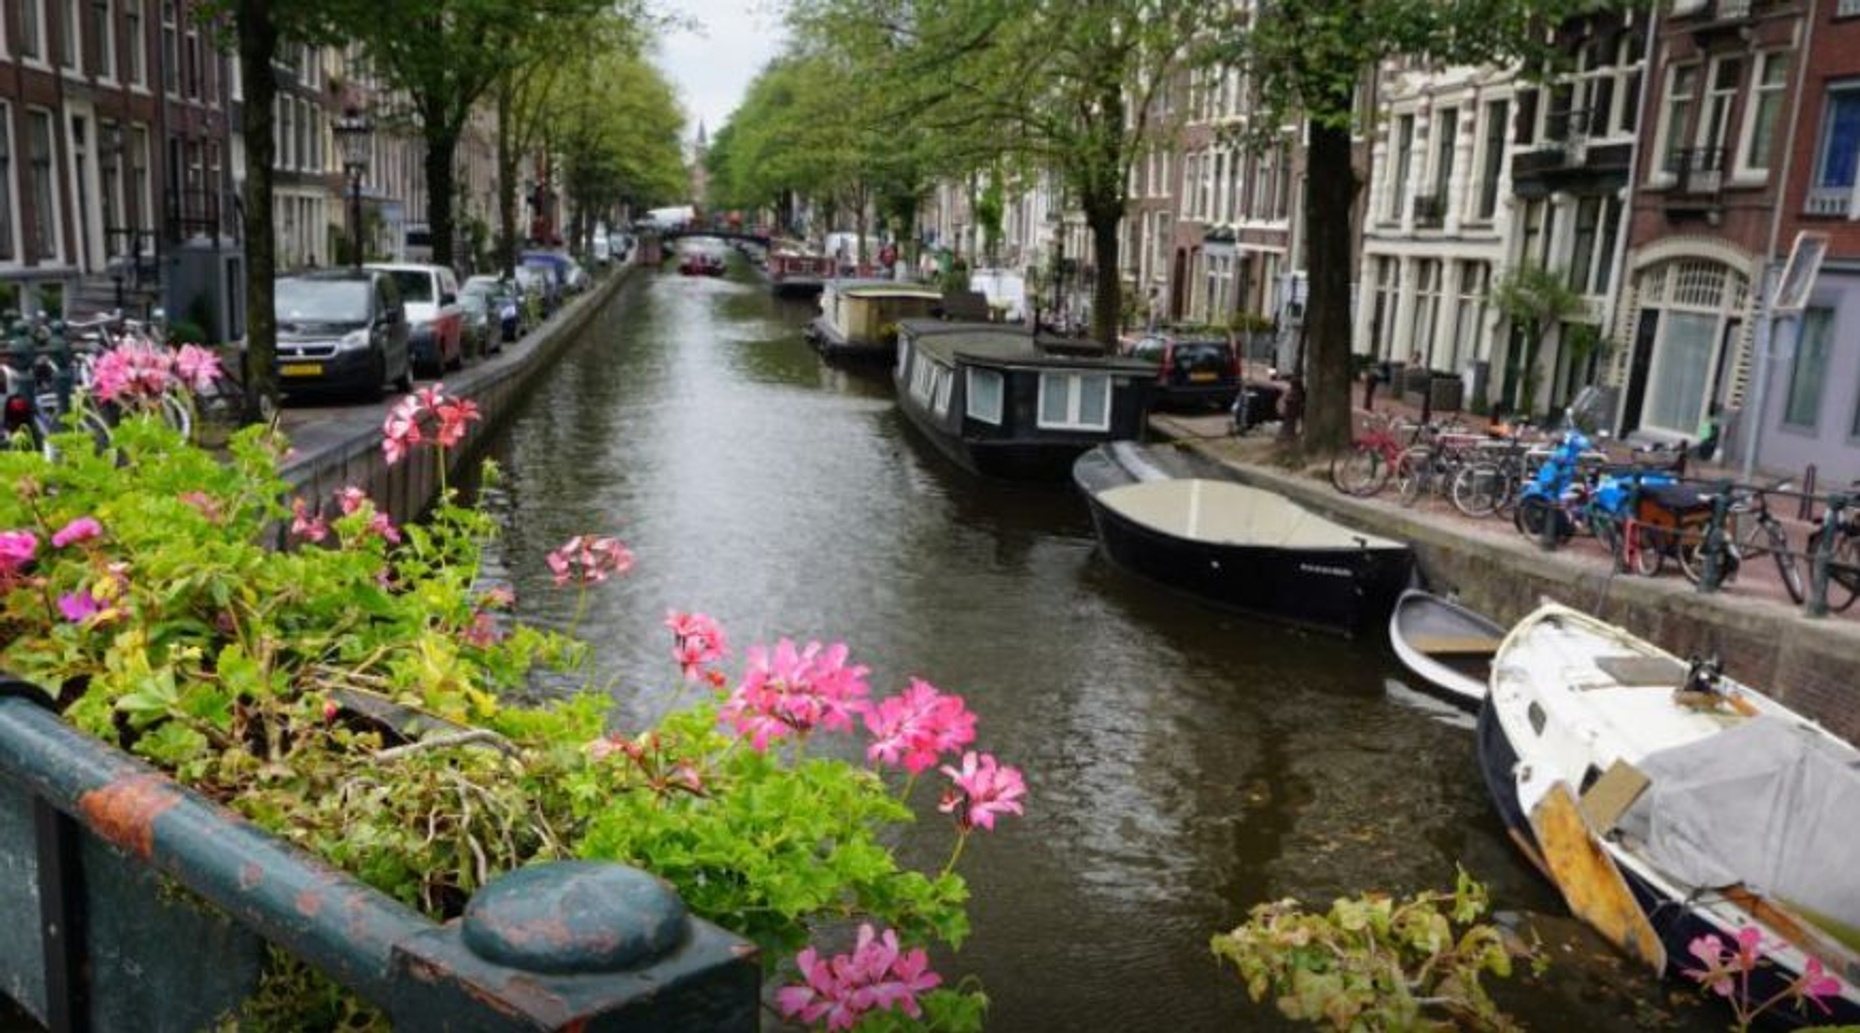 4-Hour Amsterdam Food & Canals Tour